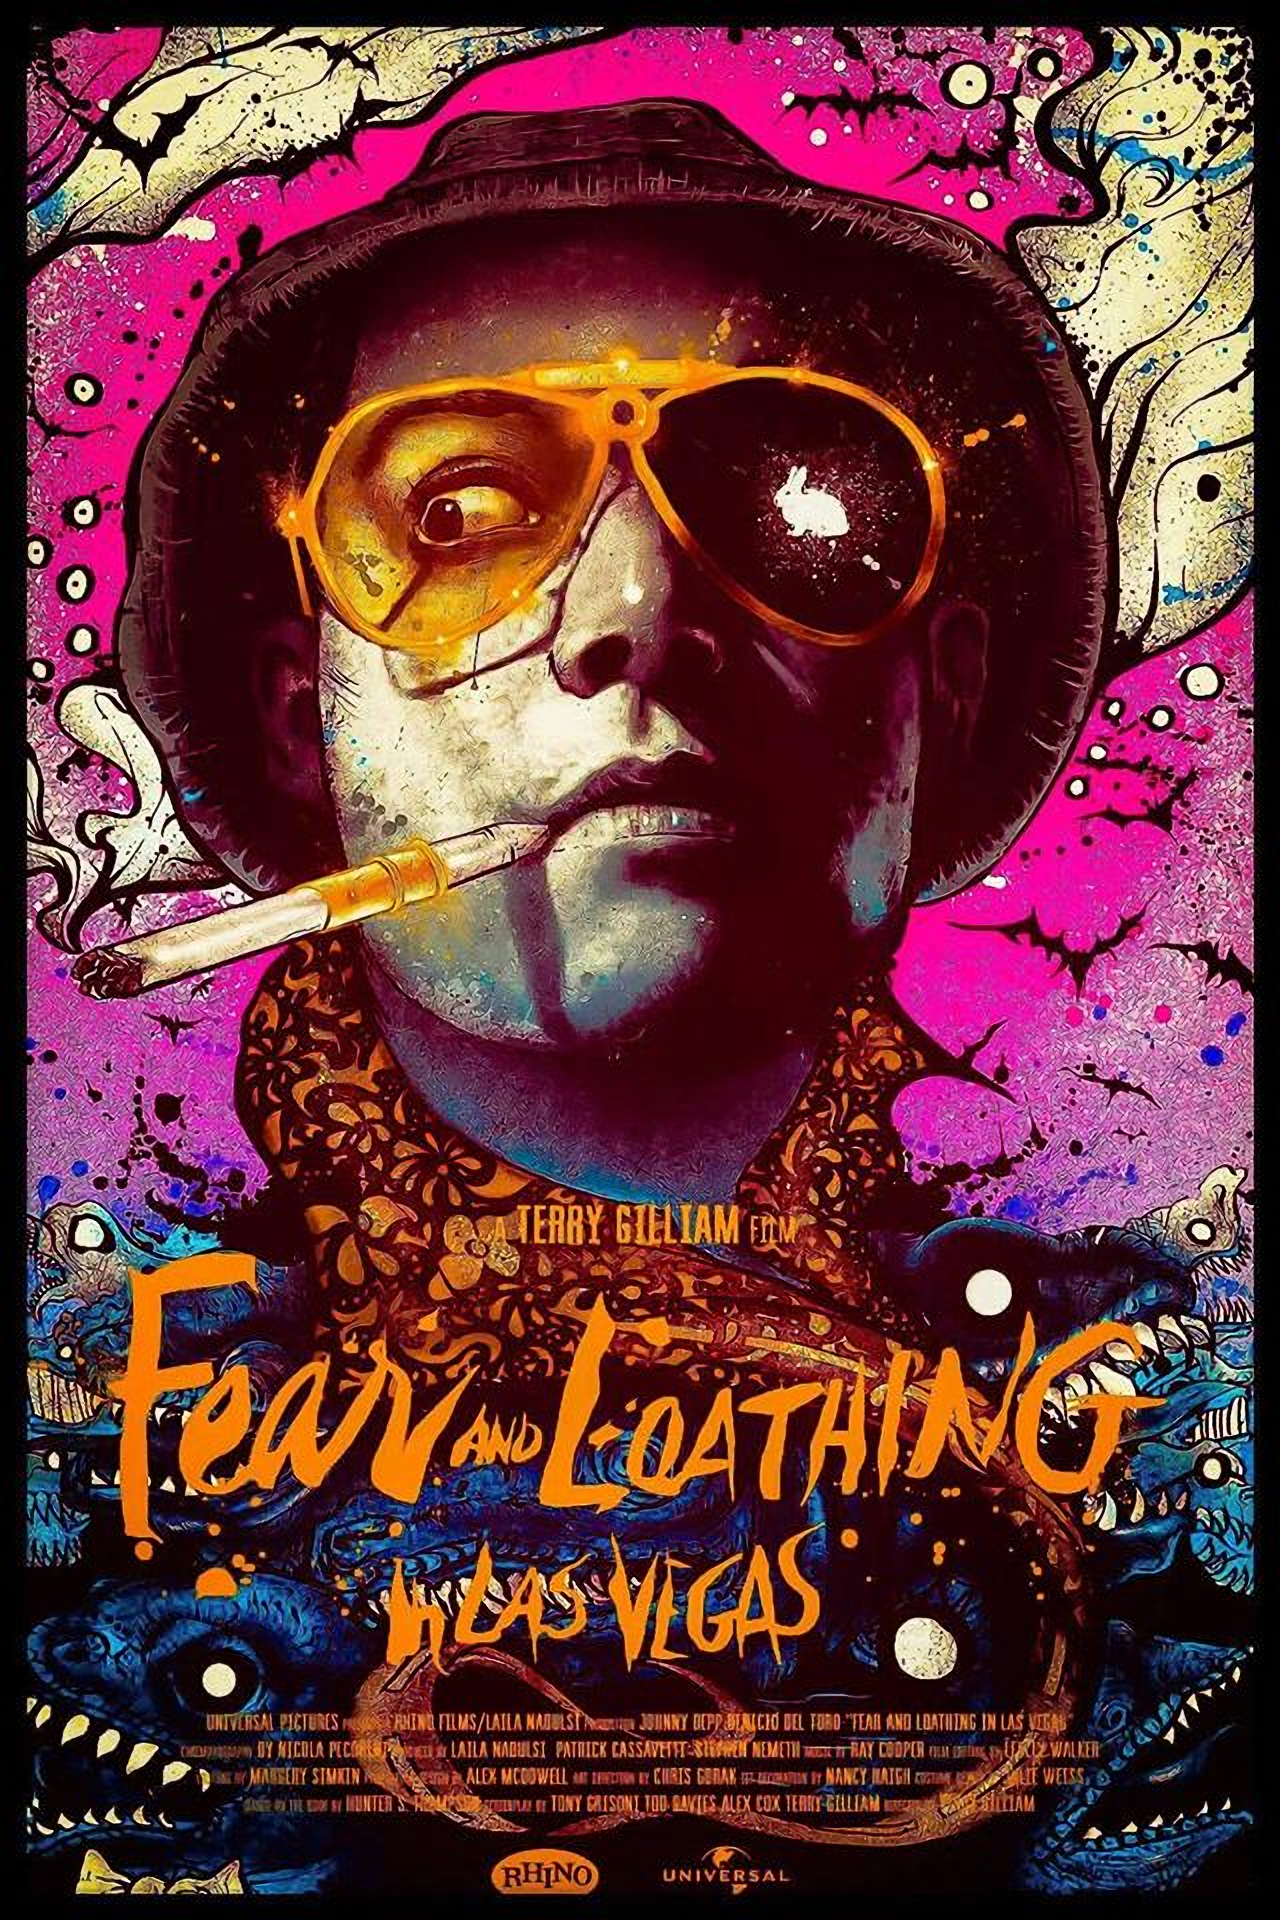 fear and loathing in las vegas wallpaper,poster,graphic design,font,advertising,flyer